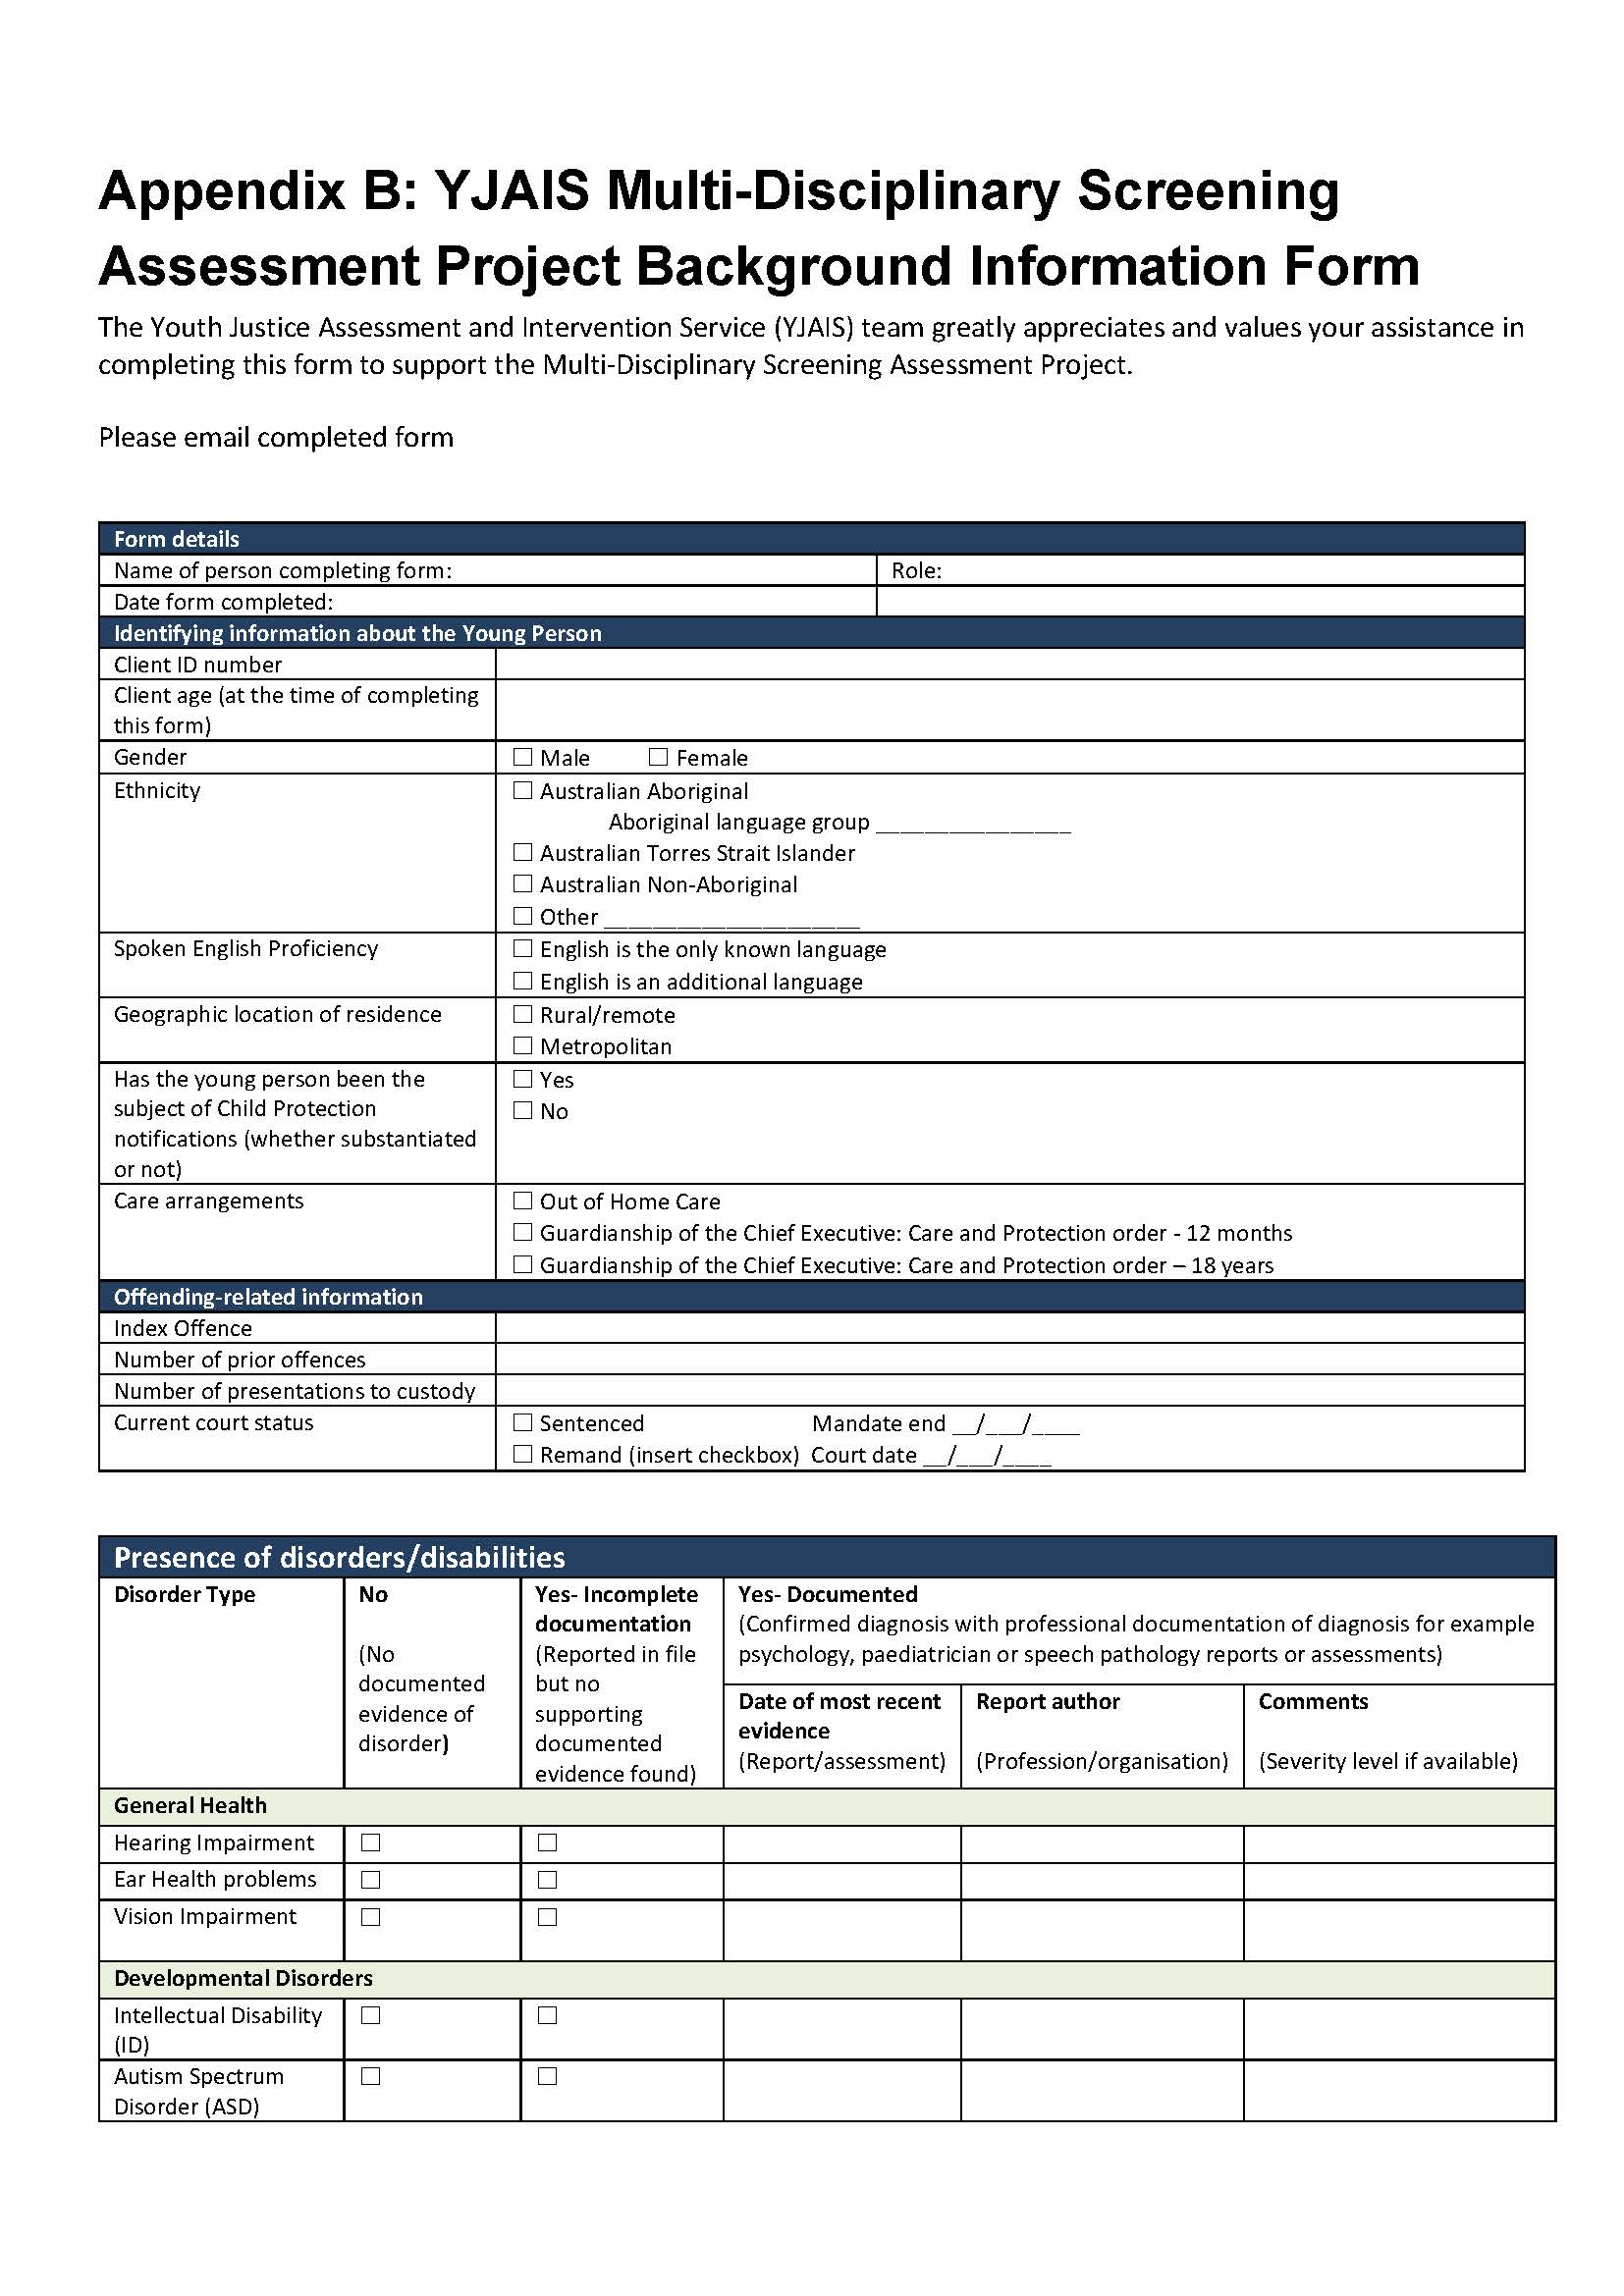 YJAIS Multi–disciplinary screening assessment project background information form. There are two pages to this form covering the client's personal details, offending history, disability and involvement with other agencies. 